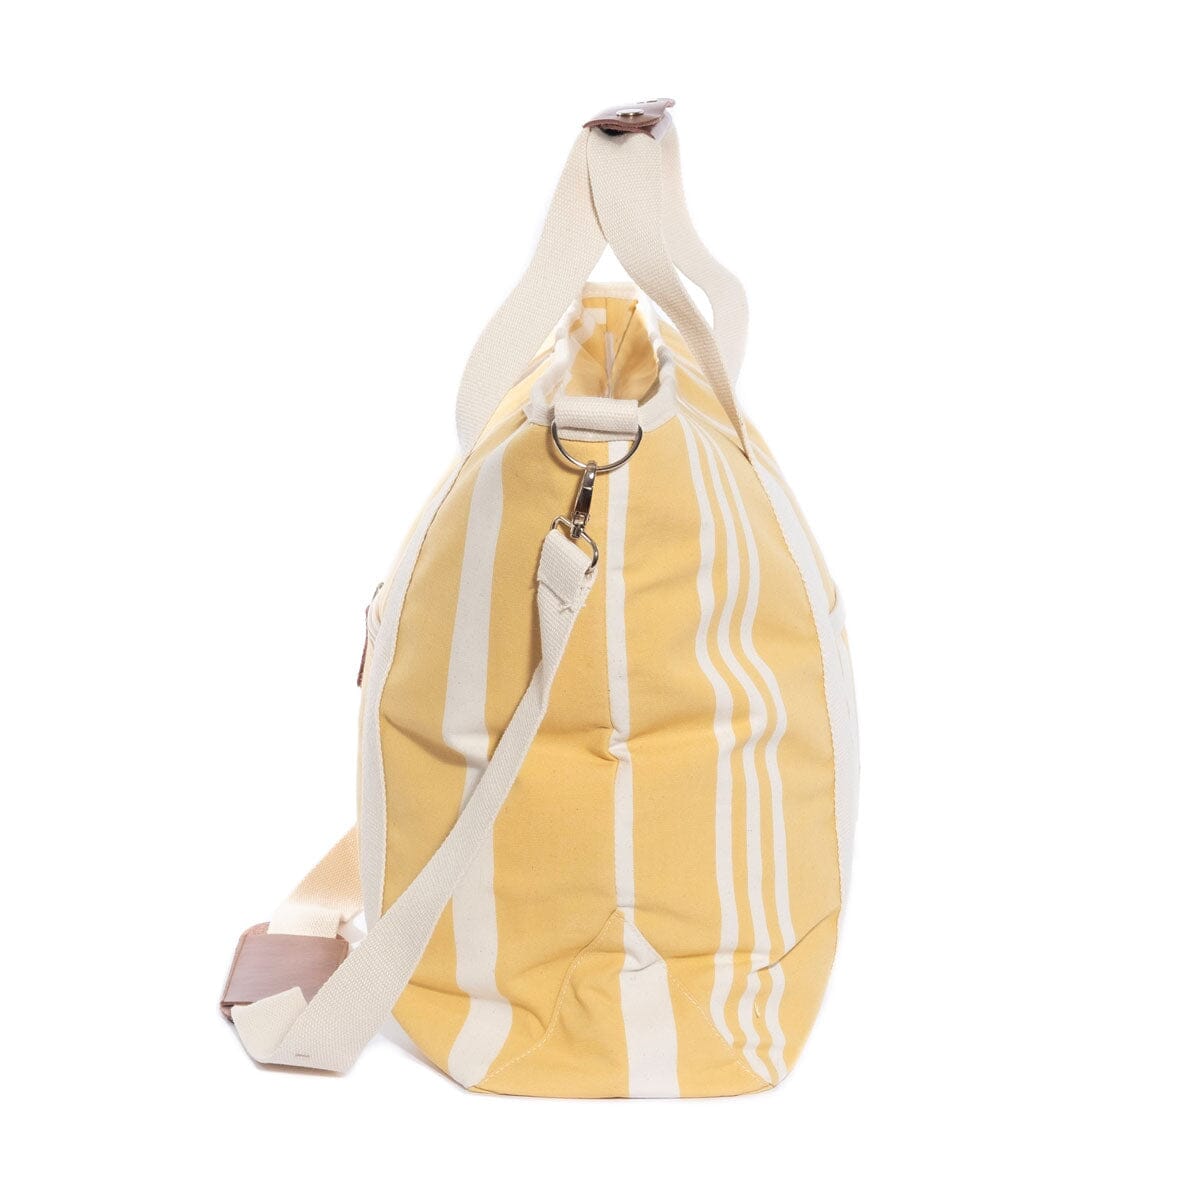 The Cooler Tote Bag - Vintage Yellow Stripe Cooler Tote Business & Pleasure Co 